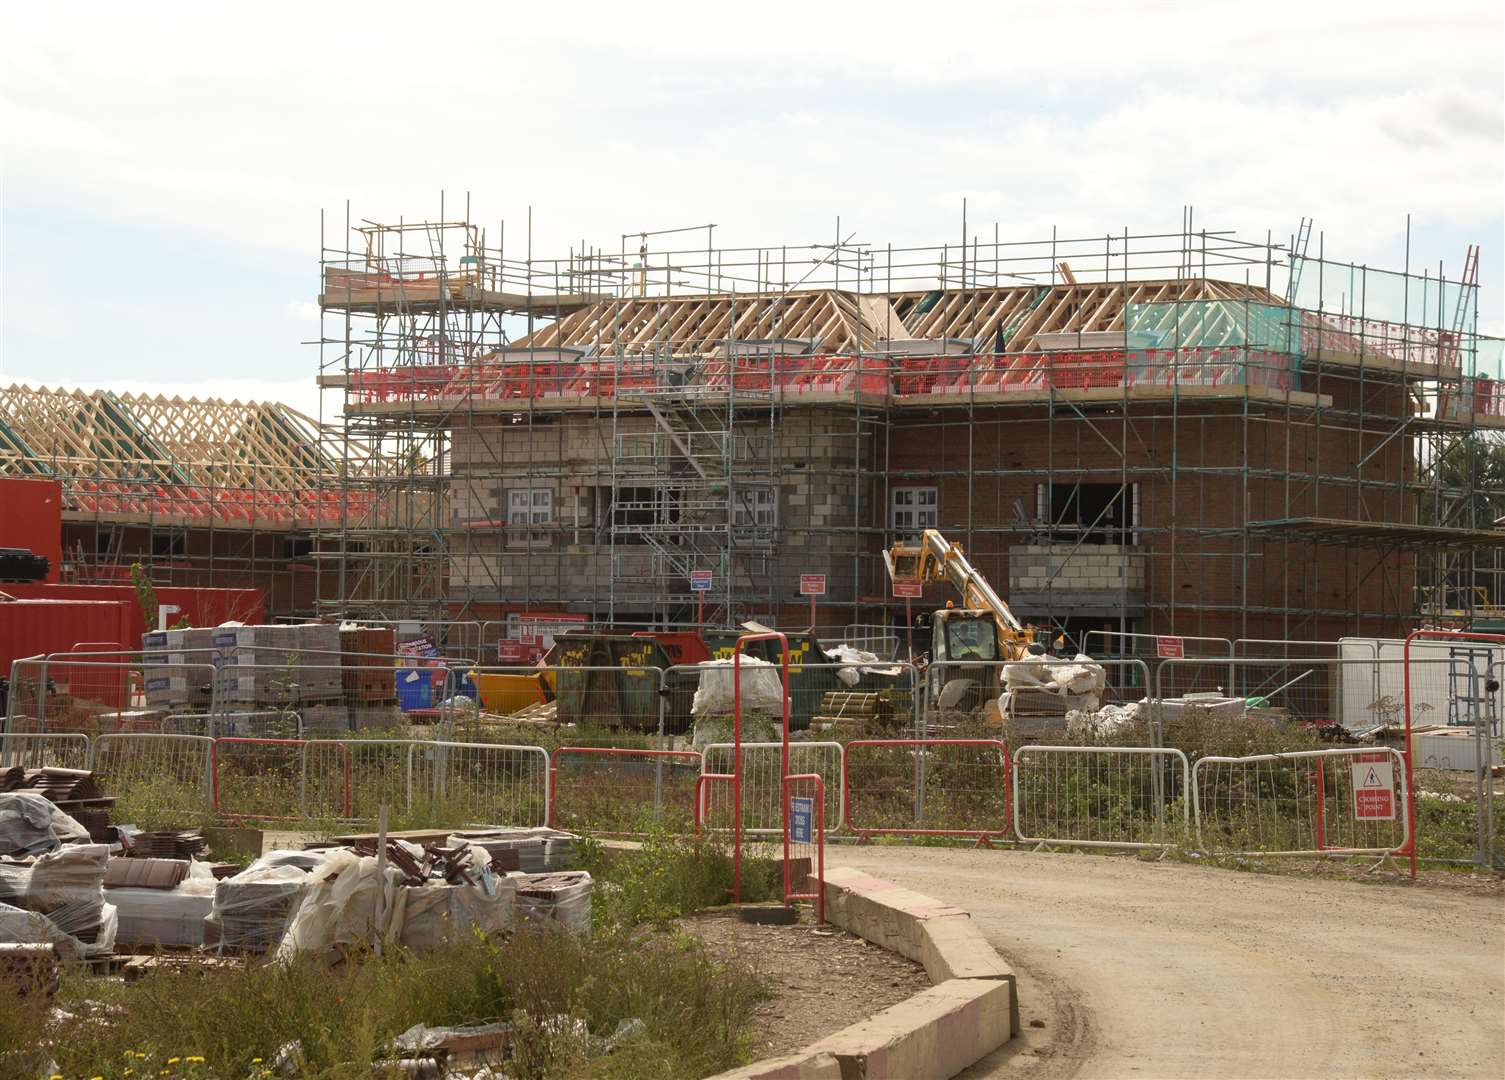 Housebuilding doesn’t sit well with many people – but it is necessary